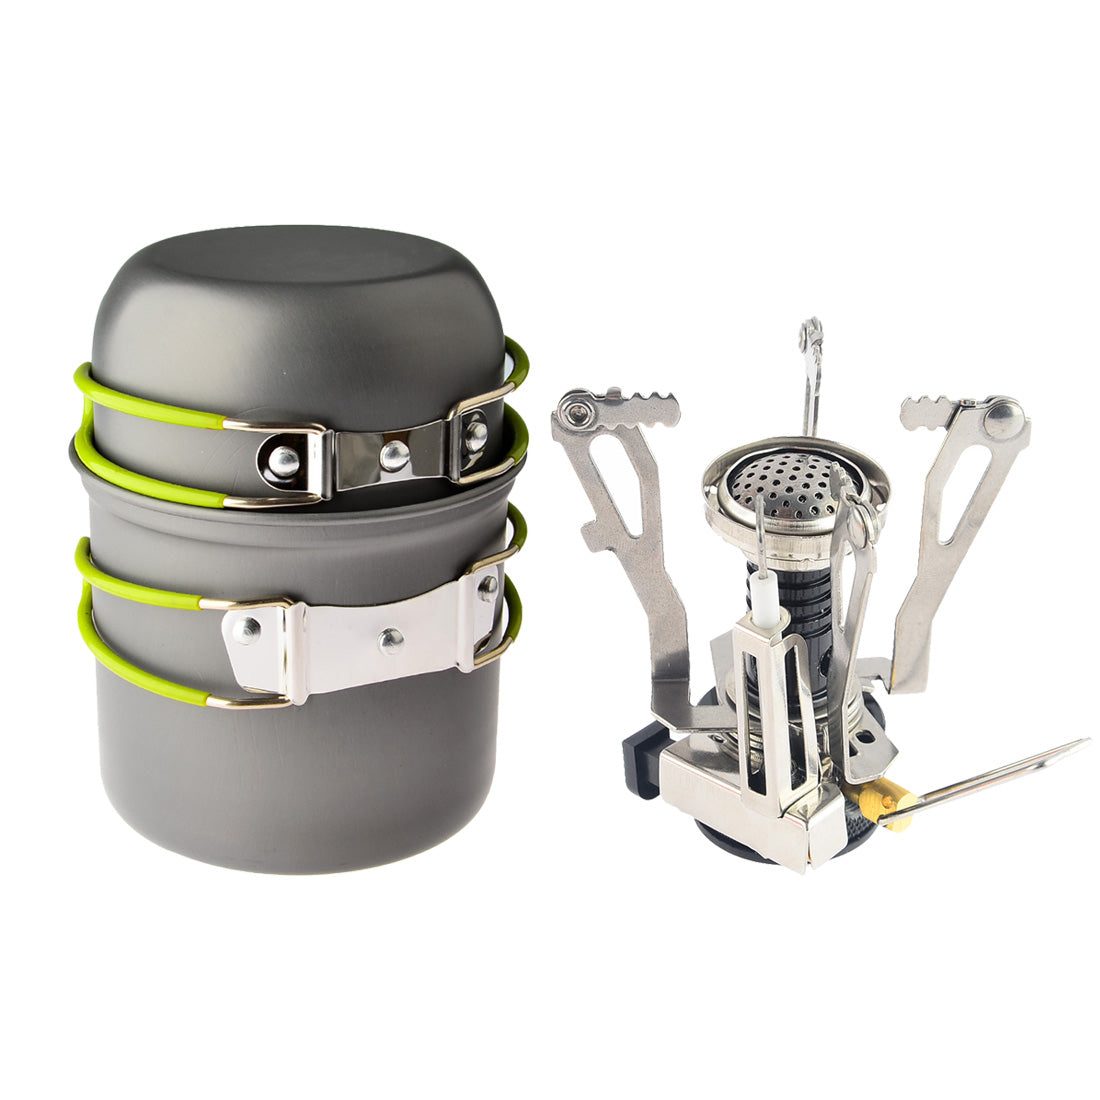 Lightweight Cooking Set With Stove Ideal For Outdoor Camping Hiking Backpacking